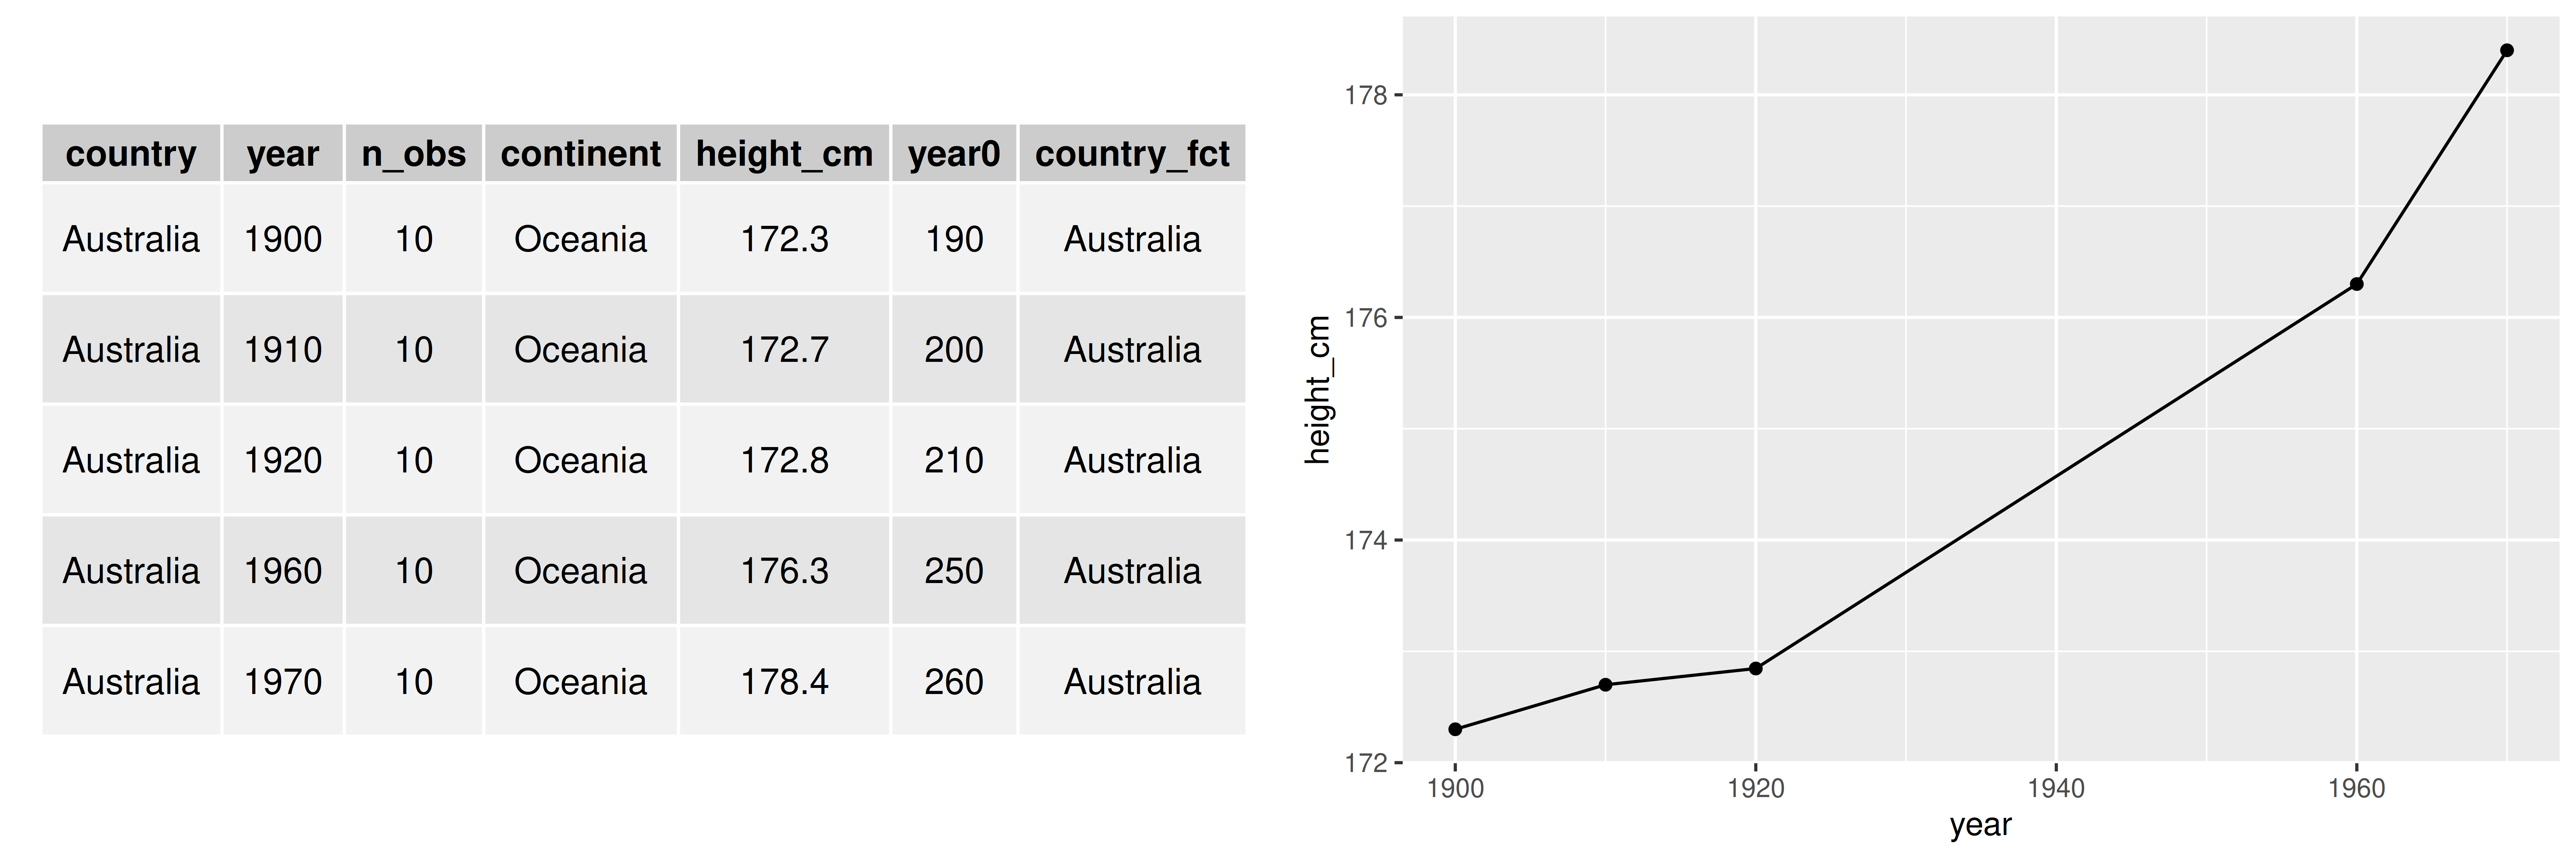 Example of longitudinal data: average height of men in Australia for 1900-1970. The height increase over time, and are measured at irregular intervals.